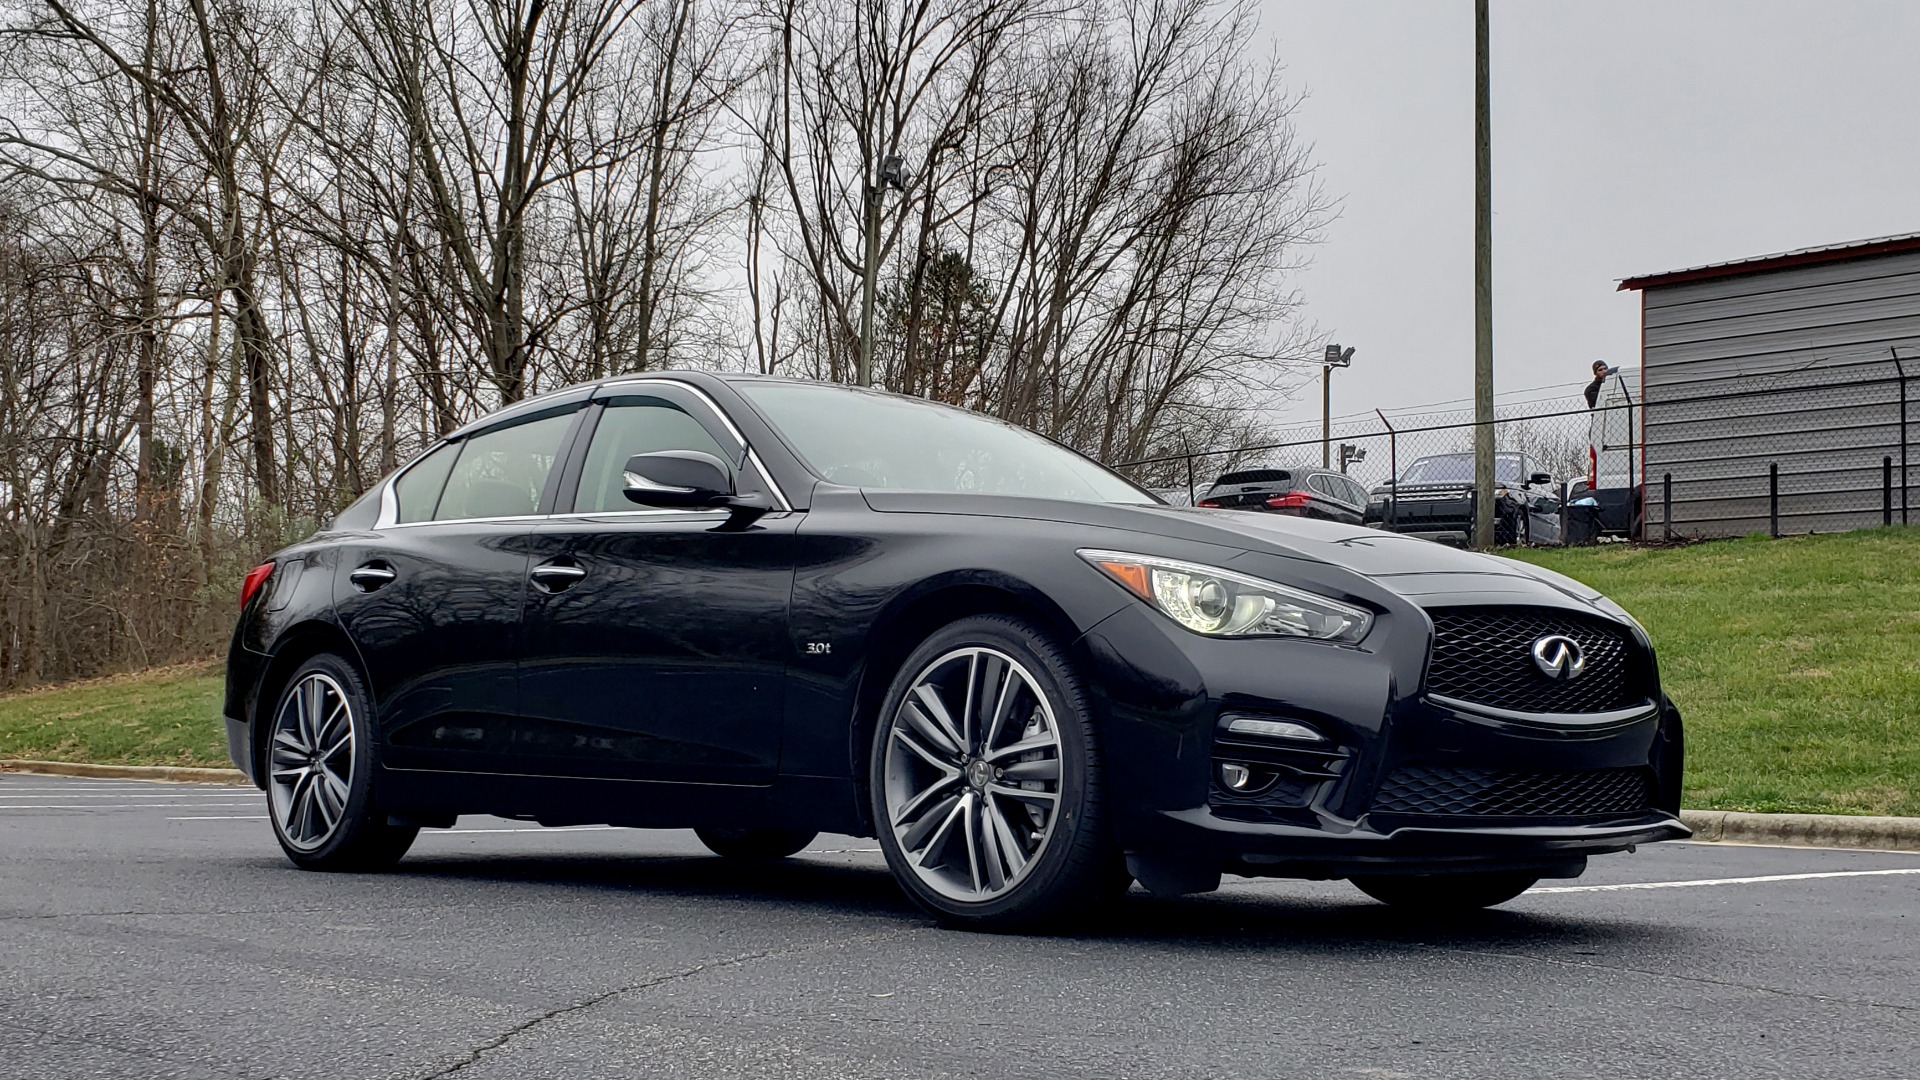 Used 2016 Infiniti Q50 3.0t PREMIUM SPORT AWD / NAV / SUNROOF / HTD STS / REARVIEW for sale Sold at Formula Imports in Charlotte NC 28227 11